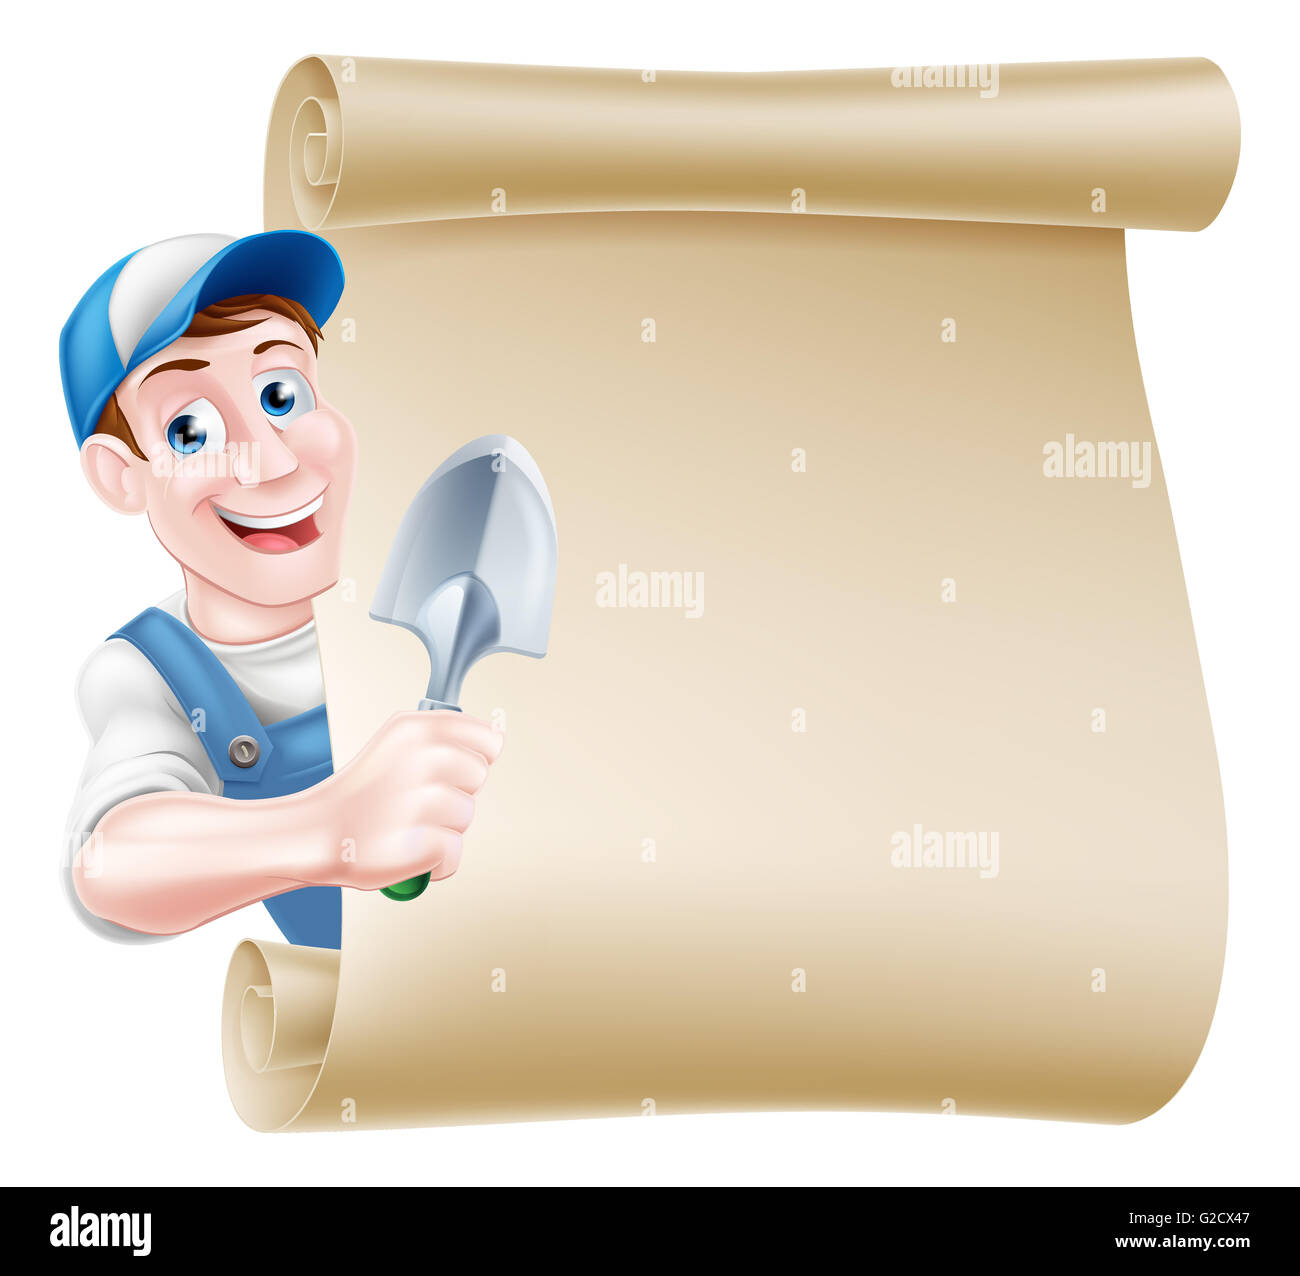 A cartoon gardener man in a cap hat and blue dungarees holding a garden trowel tool Stock Photo